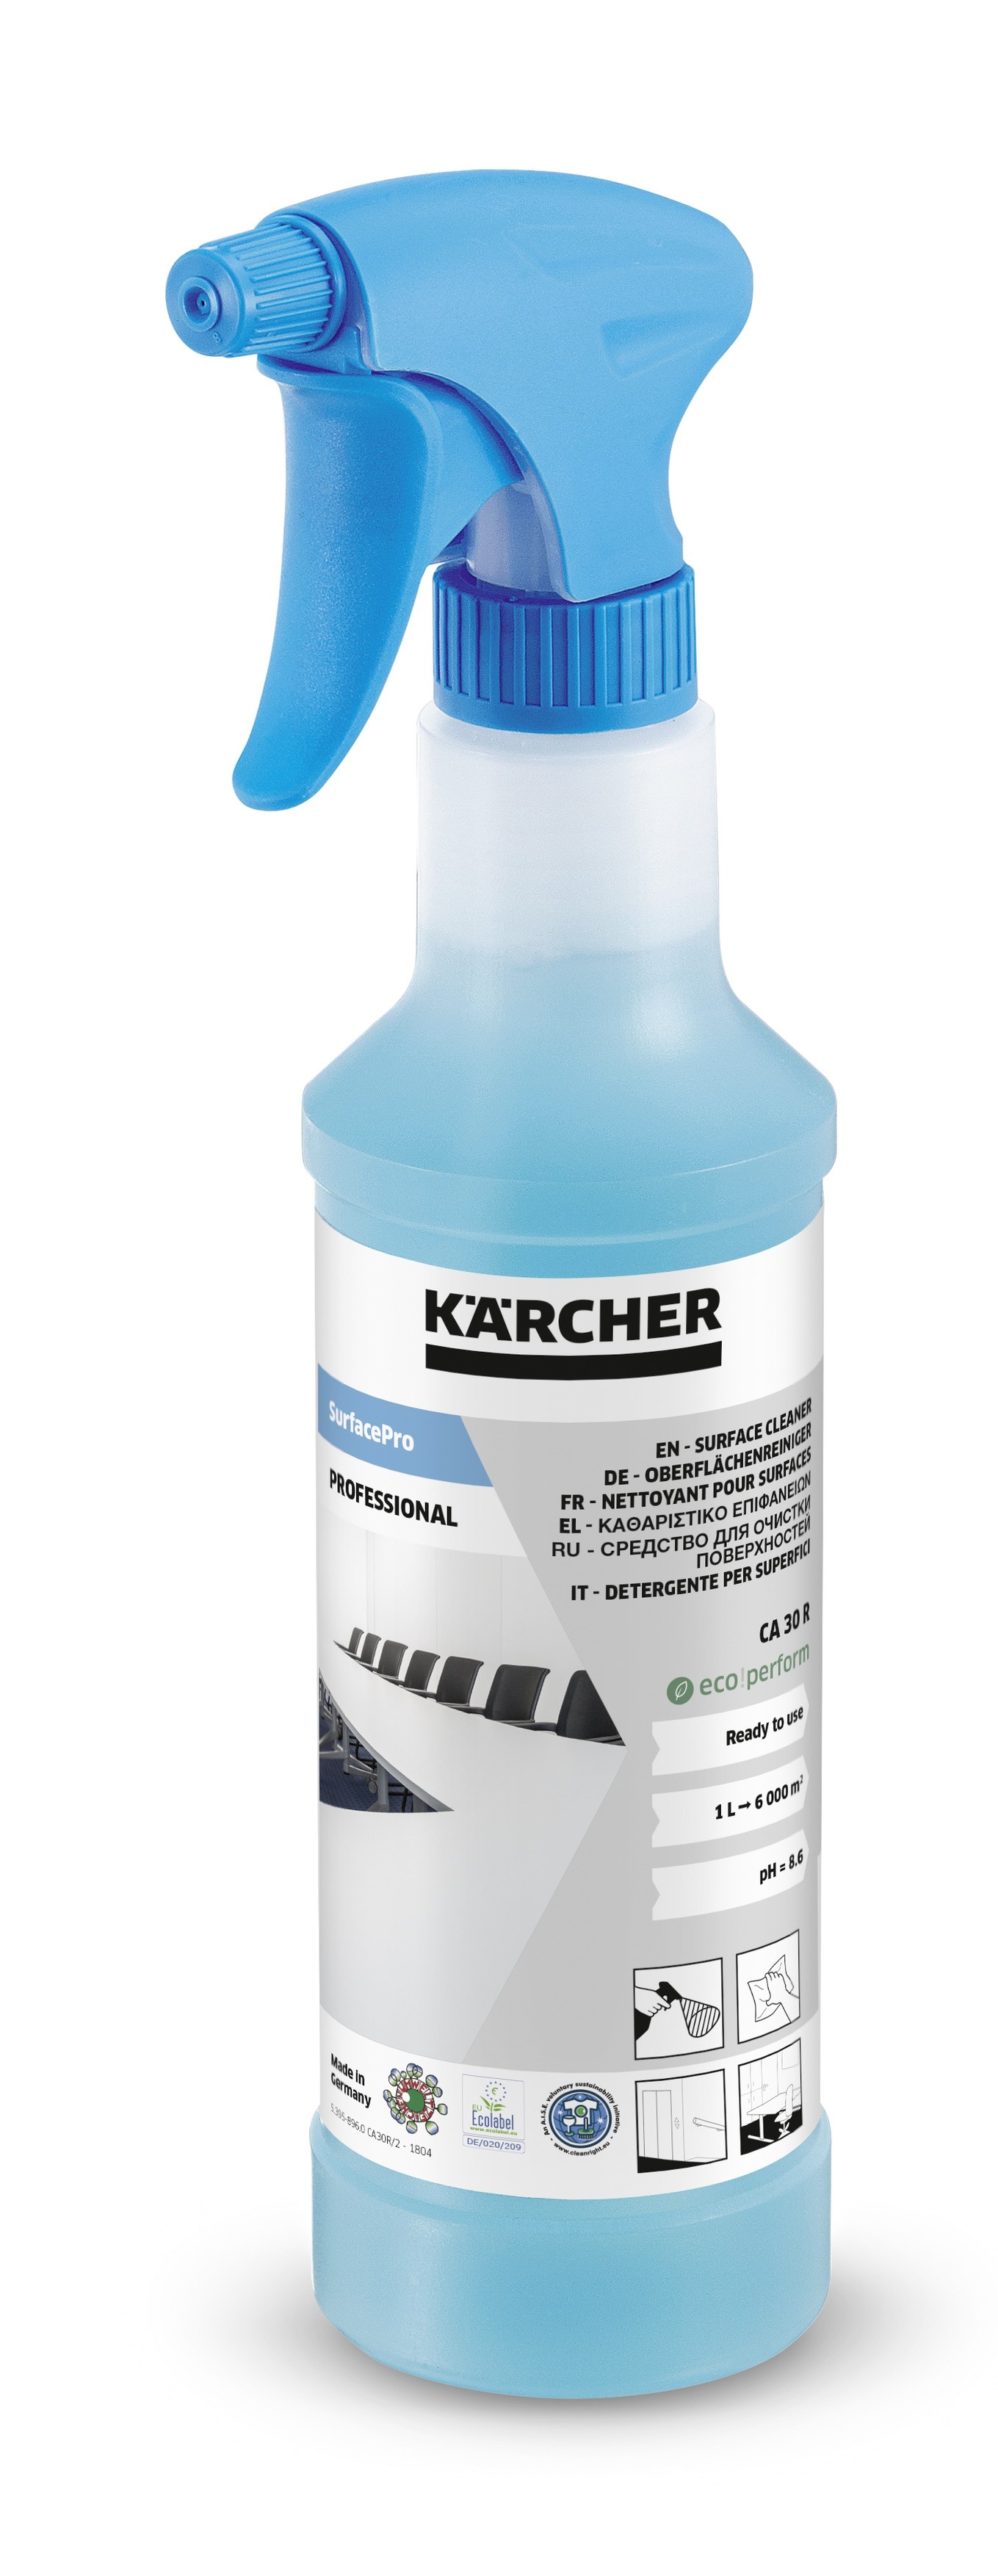 Karcher Professional High Pressure Cleaning Agent Surface Cleaner CA 30 R